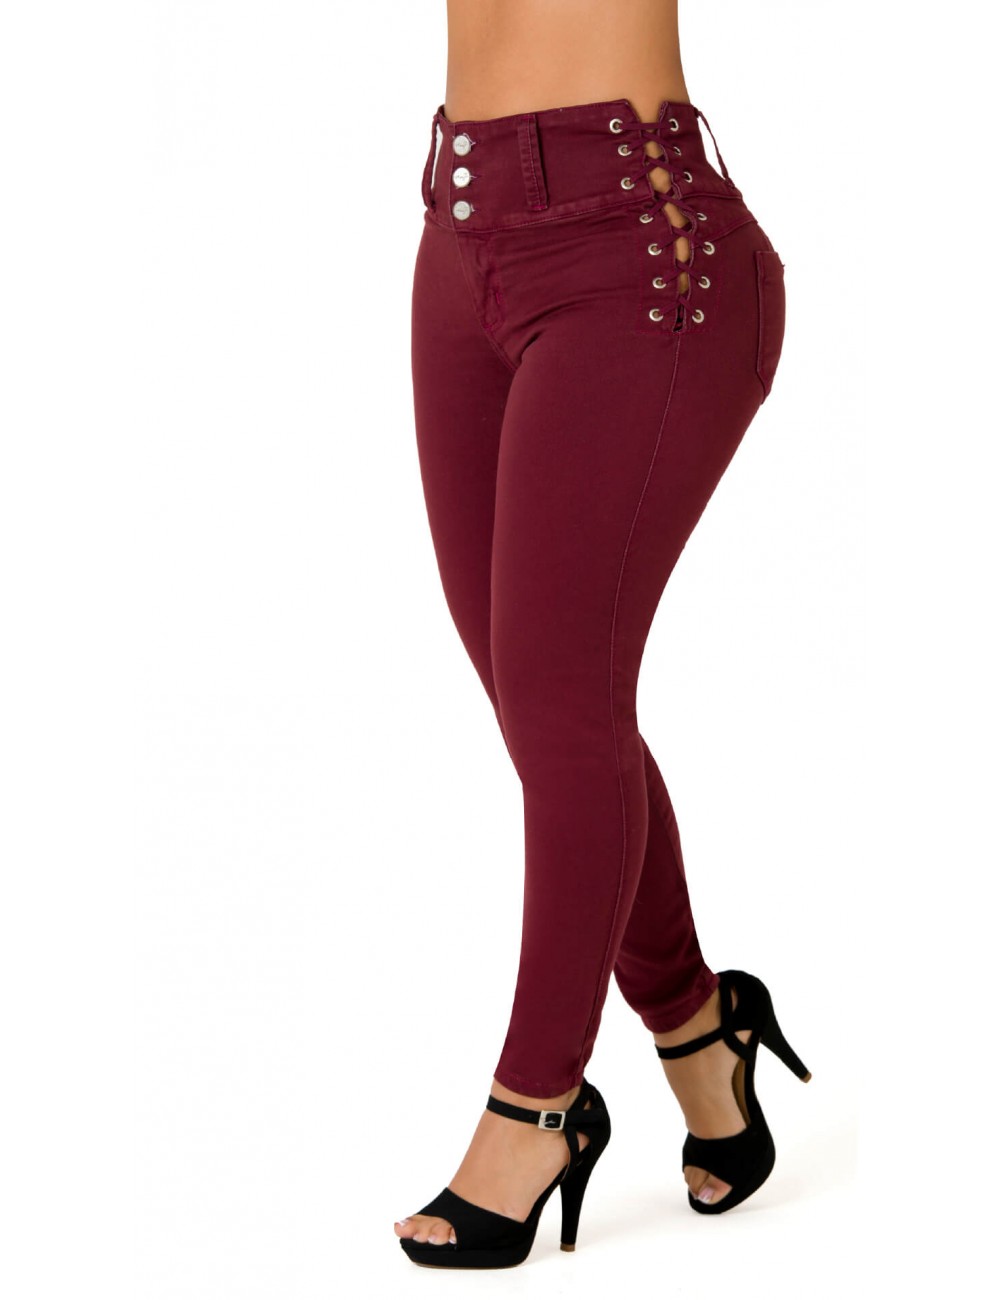 RED LIP JEANS – Kali Commercial